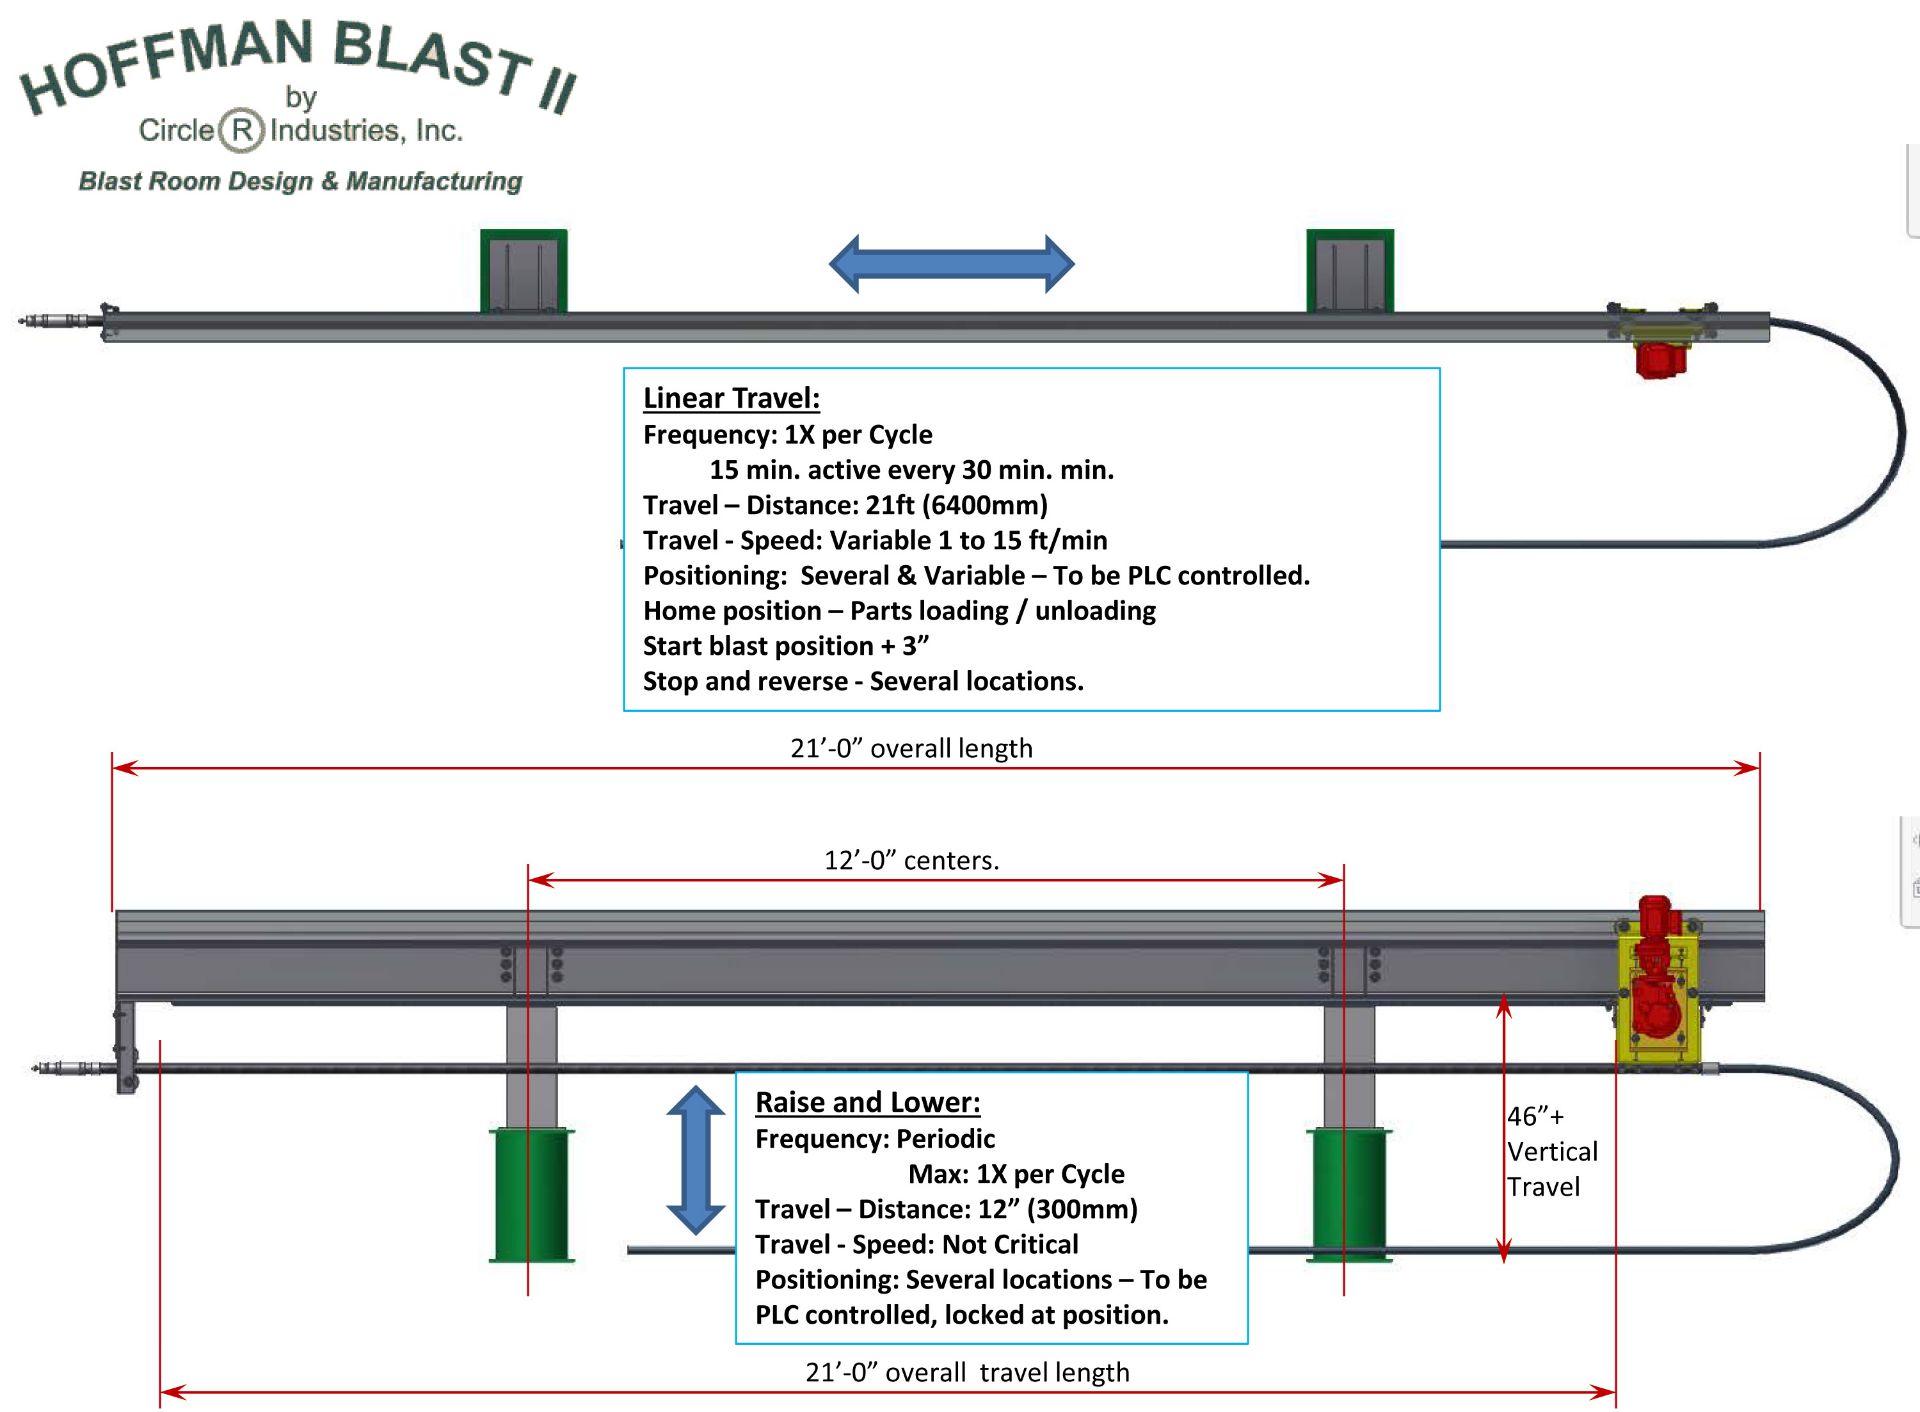 Complete Hoffman Blast II Line semi-automated system Prececo line (contains lots 160, 161, 162) - Image 7 of 14